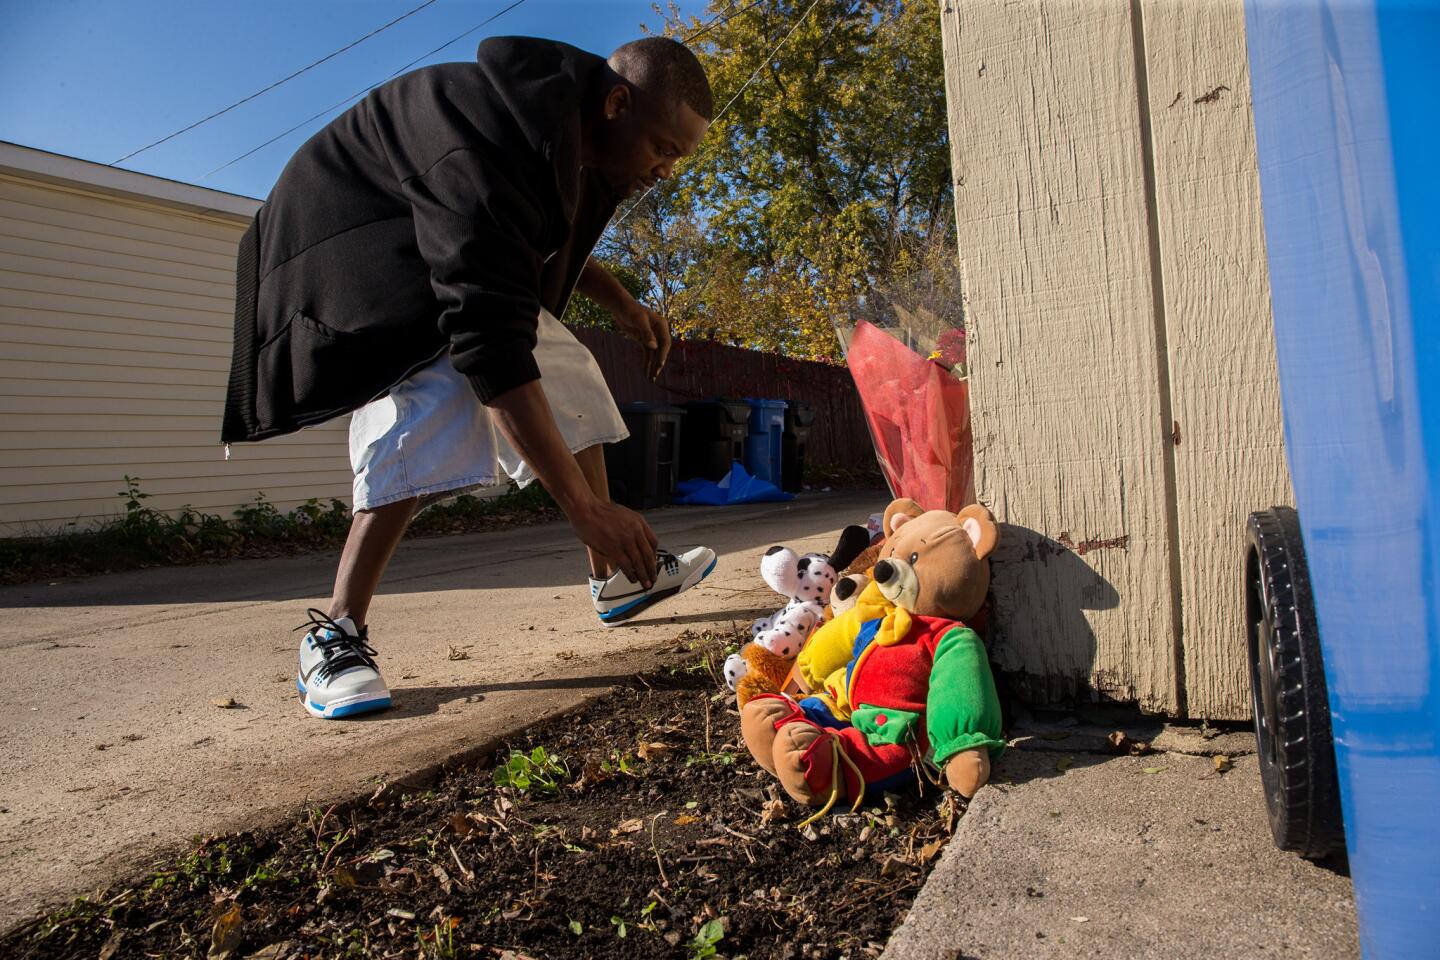 Antwan Burns-Jones, 31, puts up a memorial to Tyshawn Lee on Nov. 3, 2015. The nine-year-old was fatally shot a day earlier in the 8000 block of South Damen Avenue in Chicago's Gresham neighborhood.